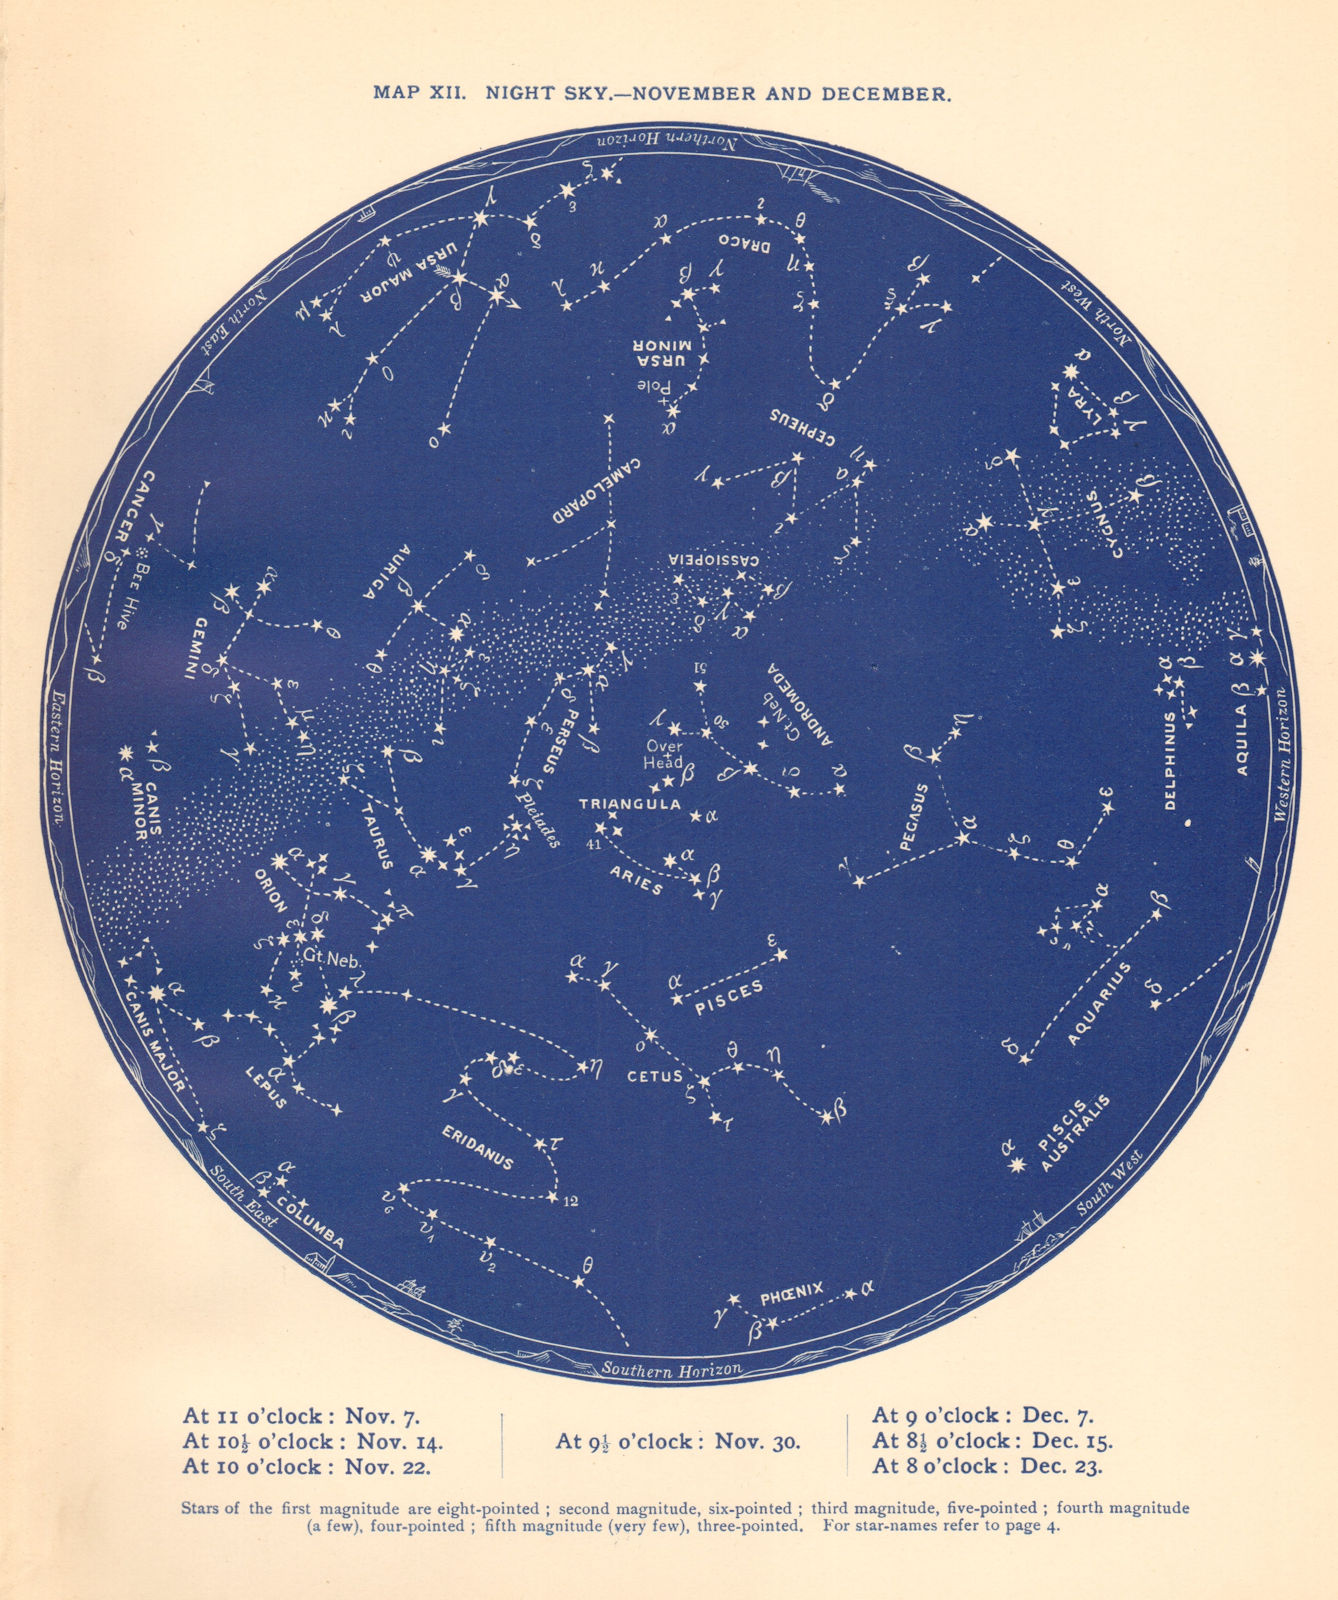 STAR MAP XII. The Night Sky. November-December. Astronomy. PROCTOR 1887